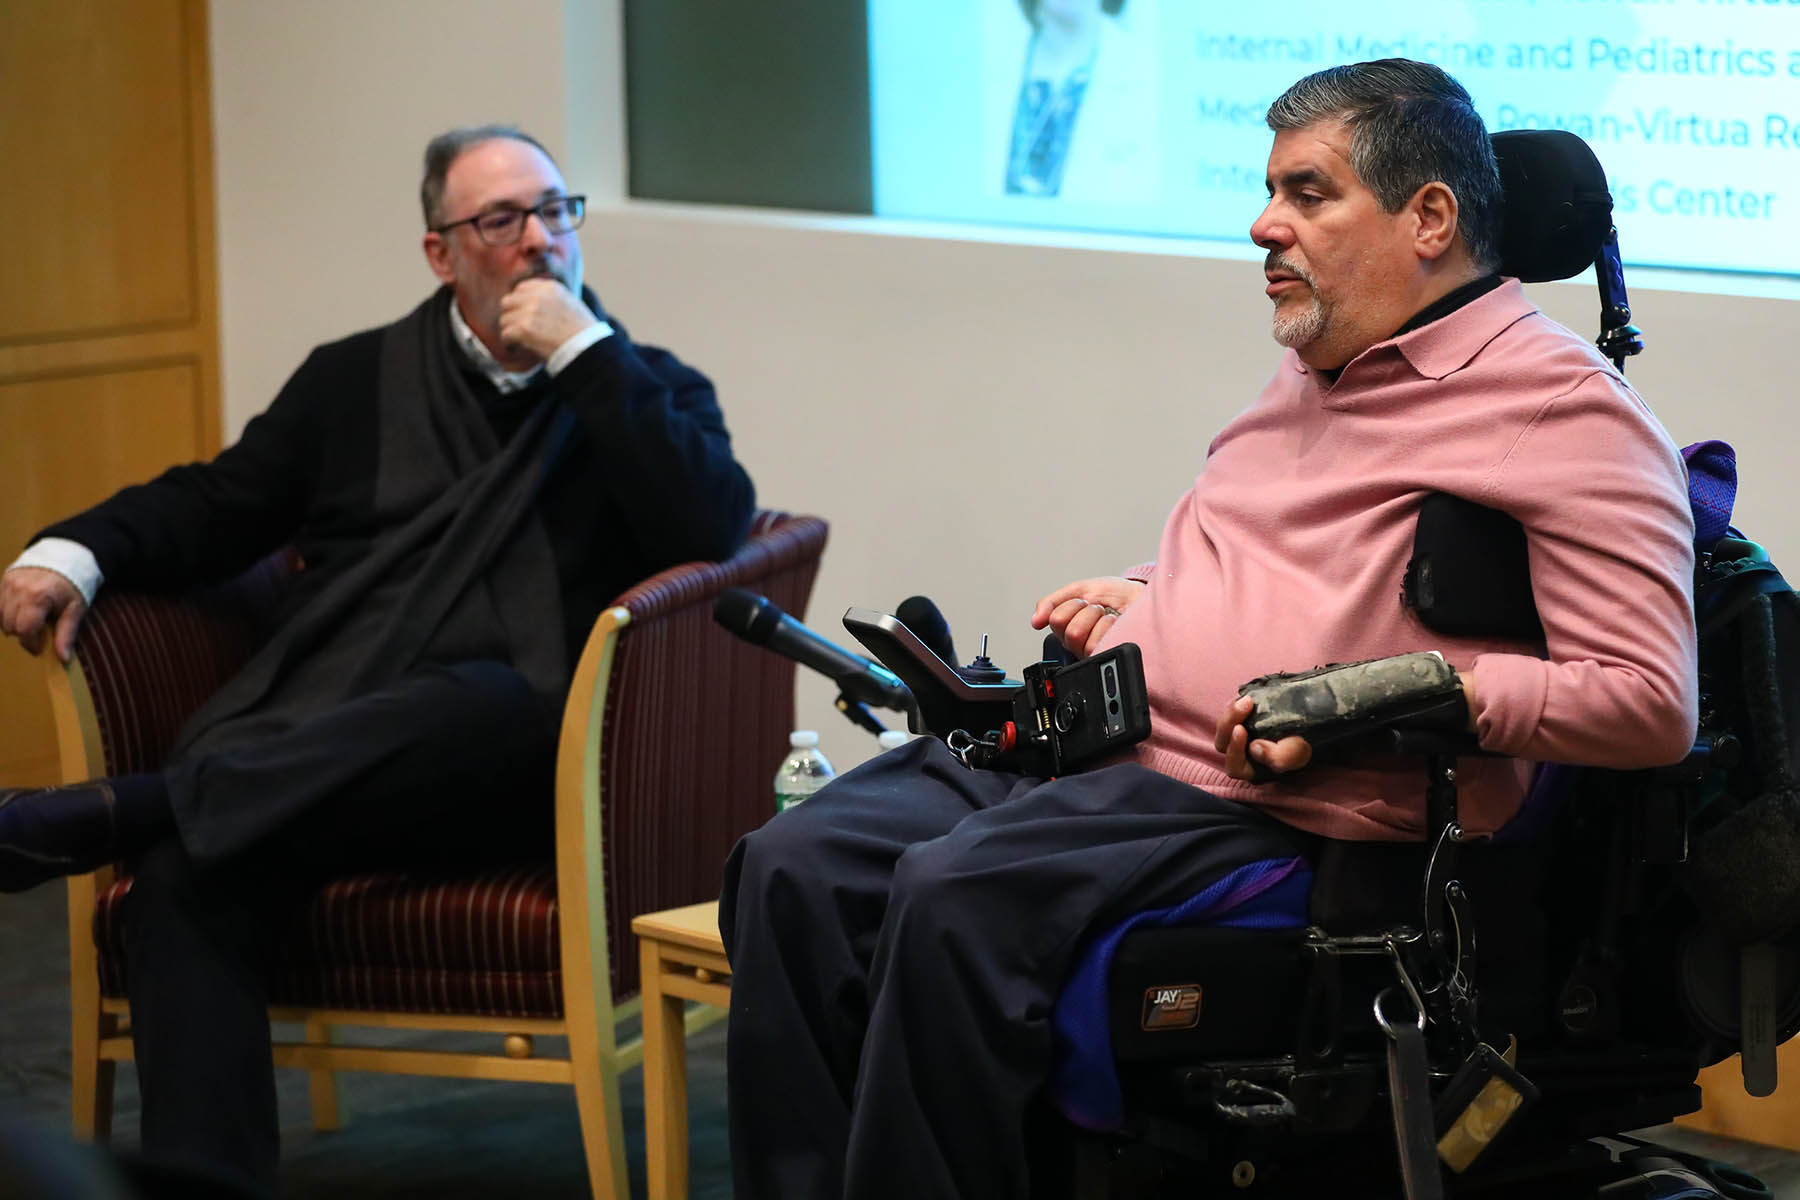 Jeffrey Friedman (left), Professor of Dance Studies at Mason Gross School of the Arts and Javier Robles (right), Professor of Kinesiology and Health, co-chairs of the Rutgers University Disability Studies committee